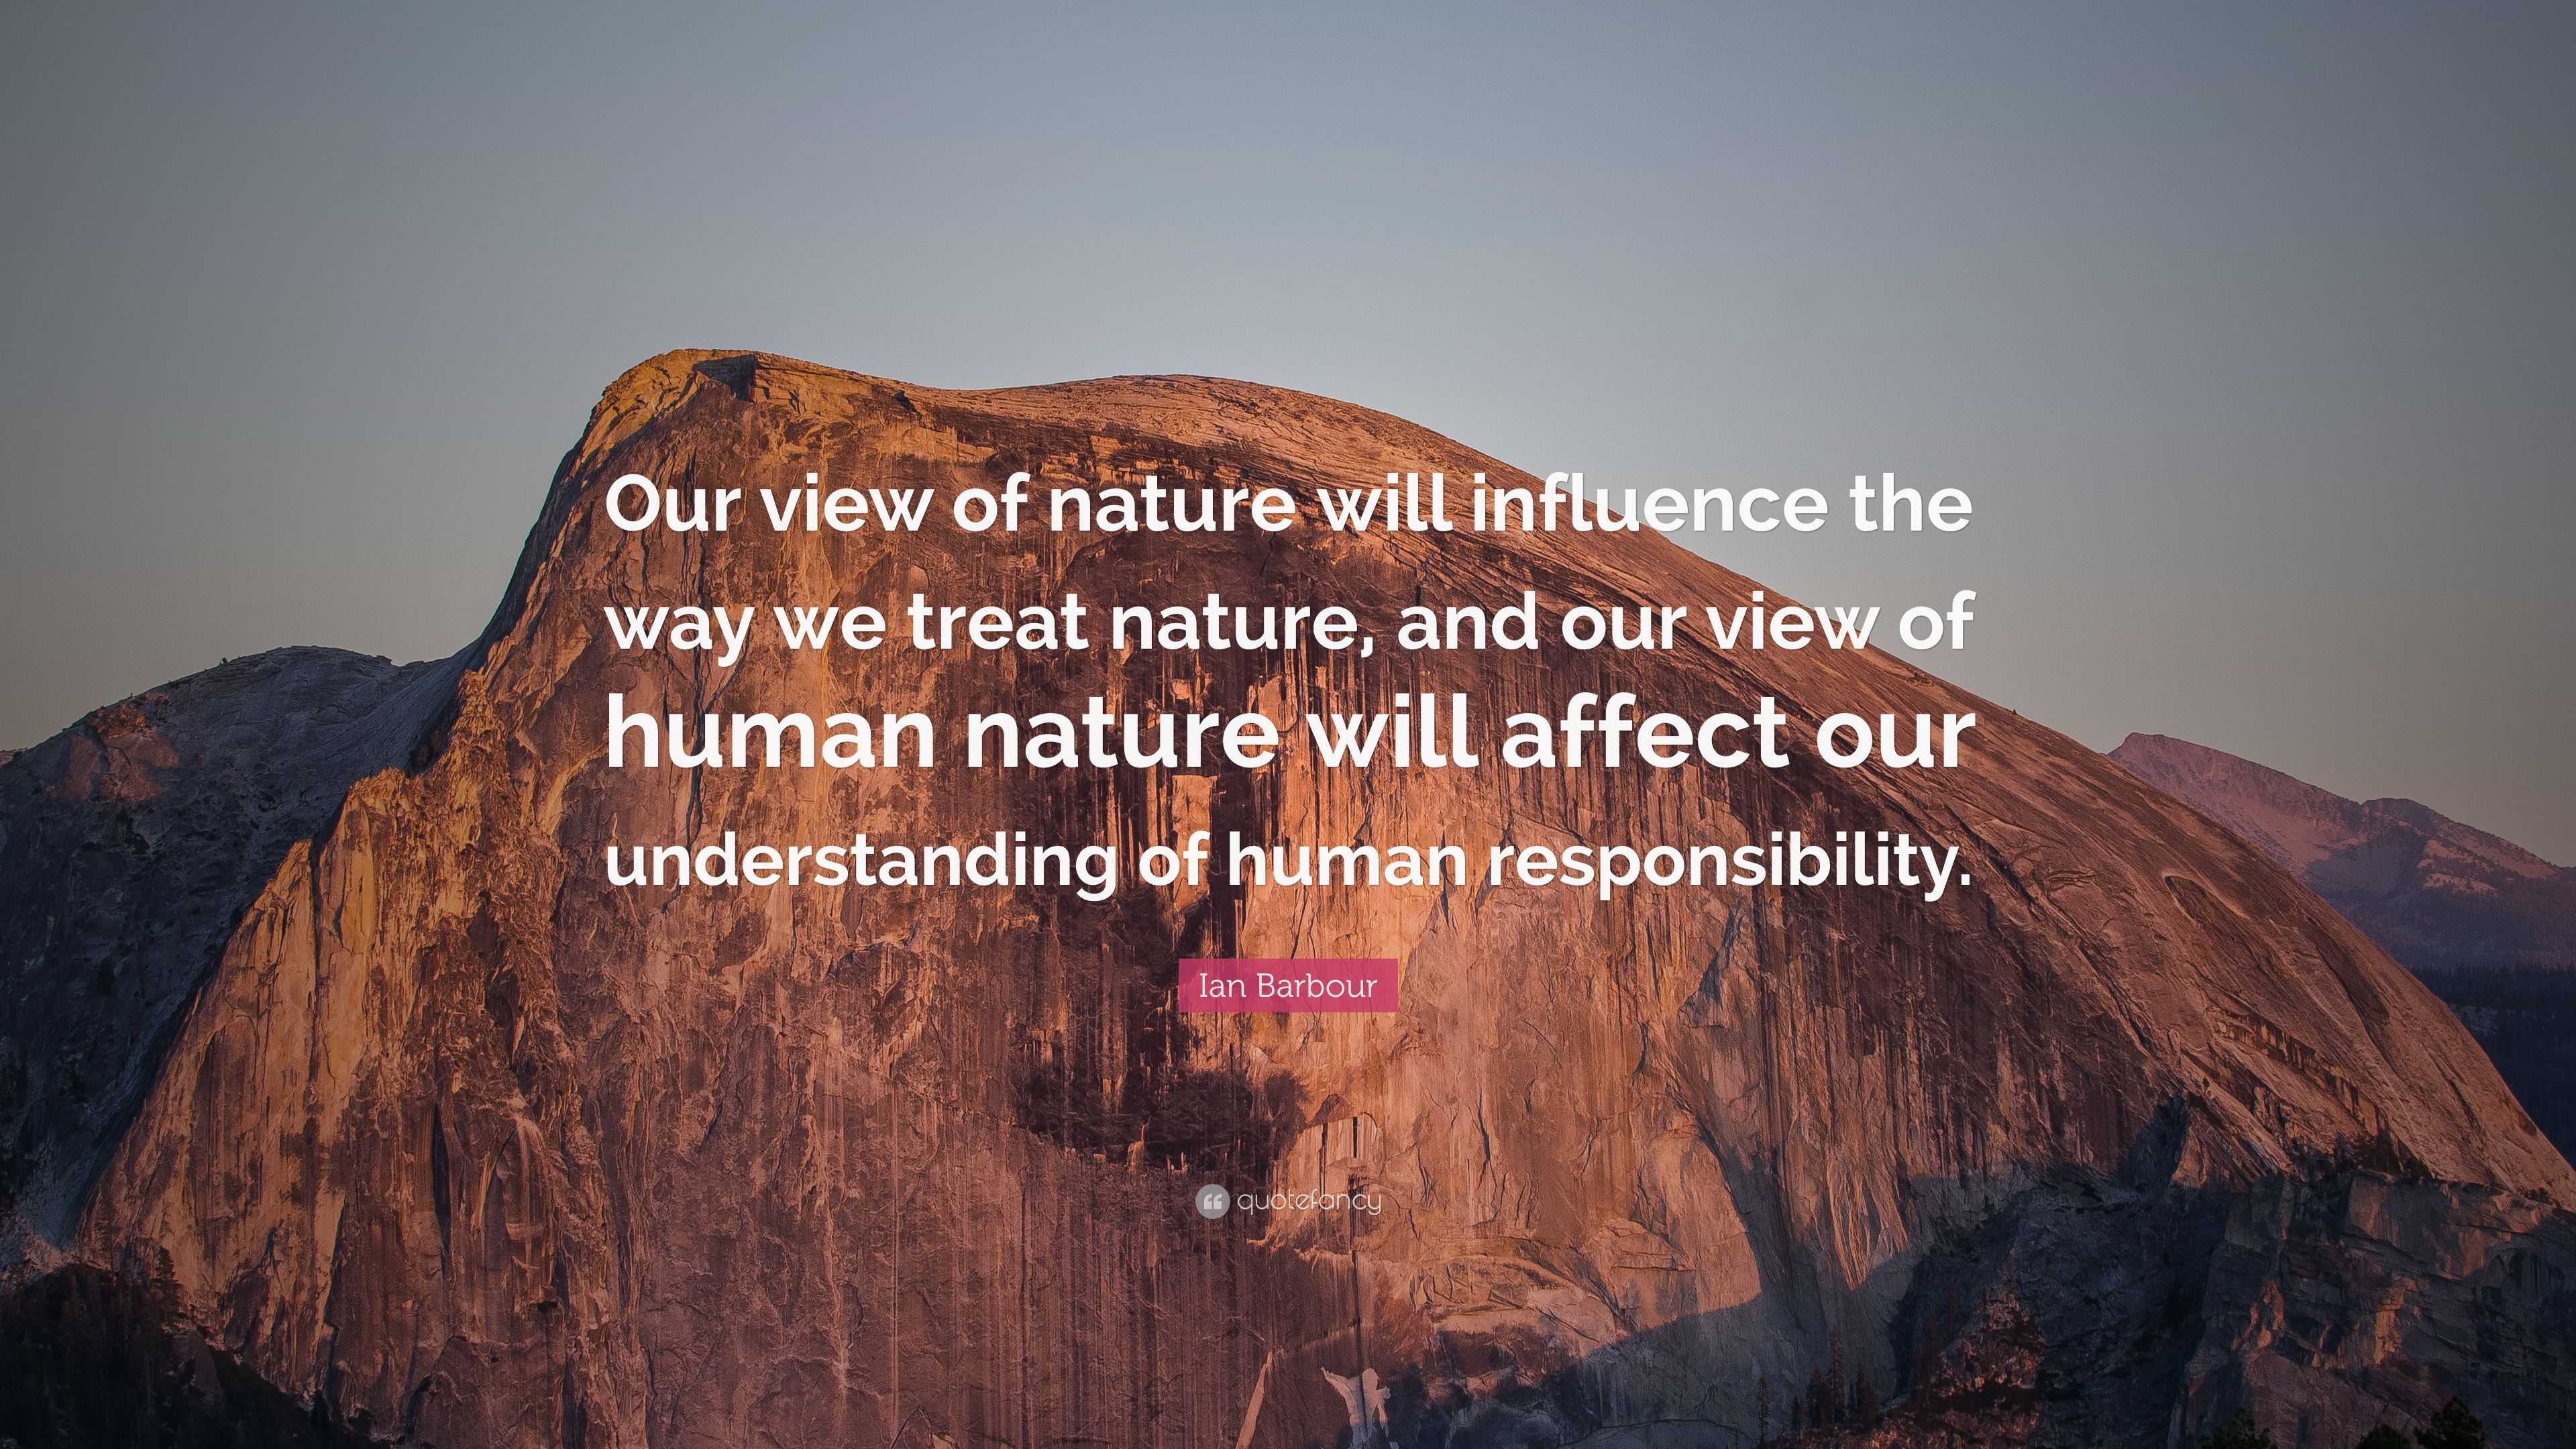 studie Sodavand Mirakuløs Ian Barbour Quote: “Our view of nature will influence the way we treat  nature, and our view of human nature will affect our understanding of...”